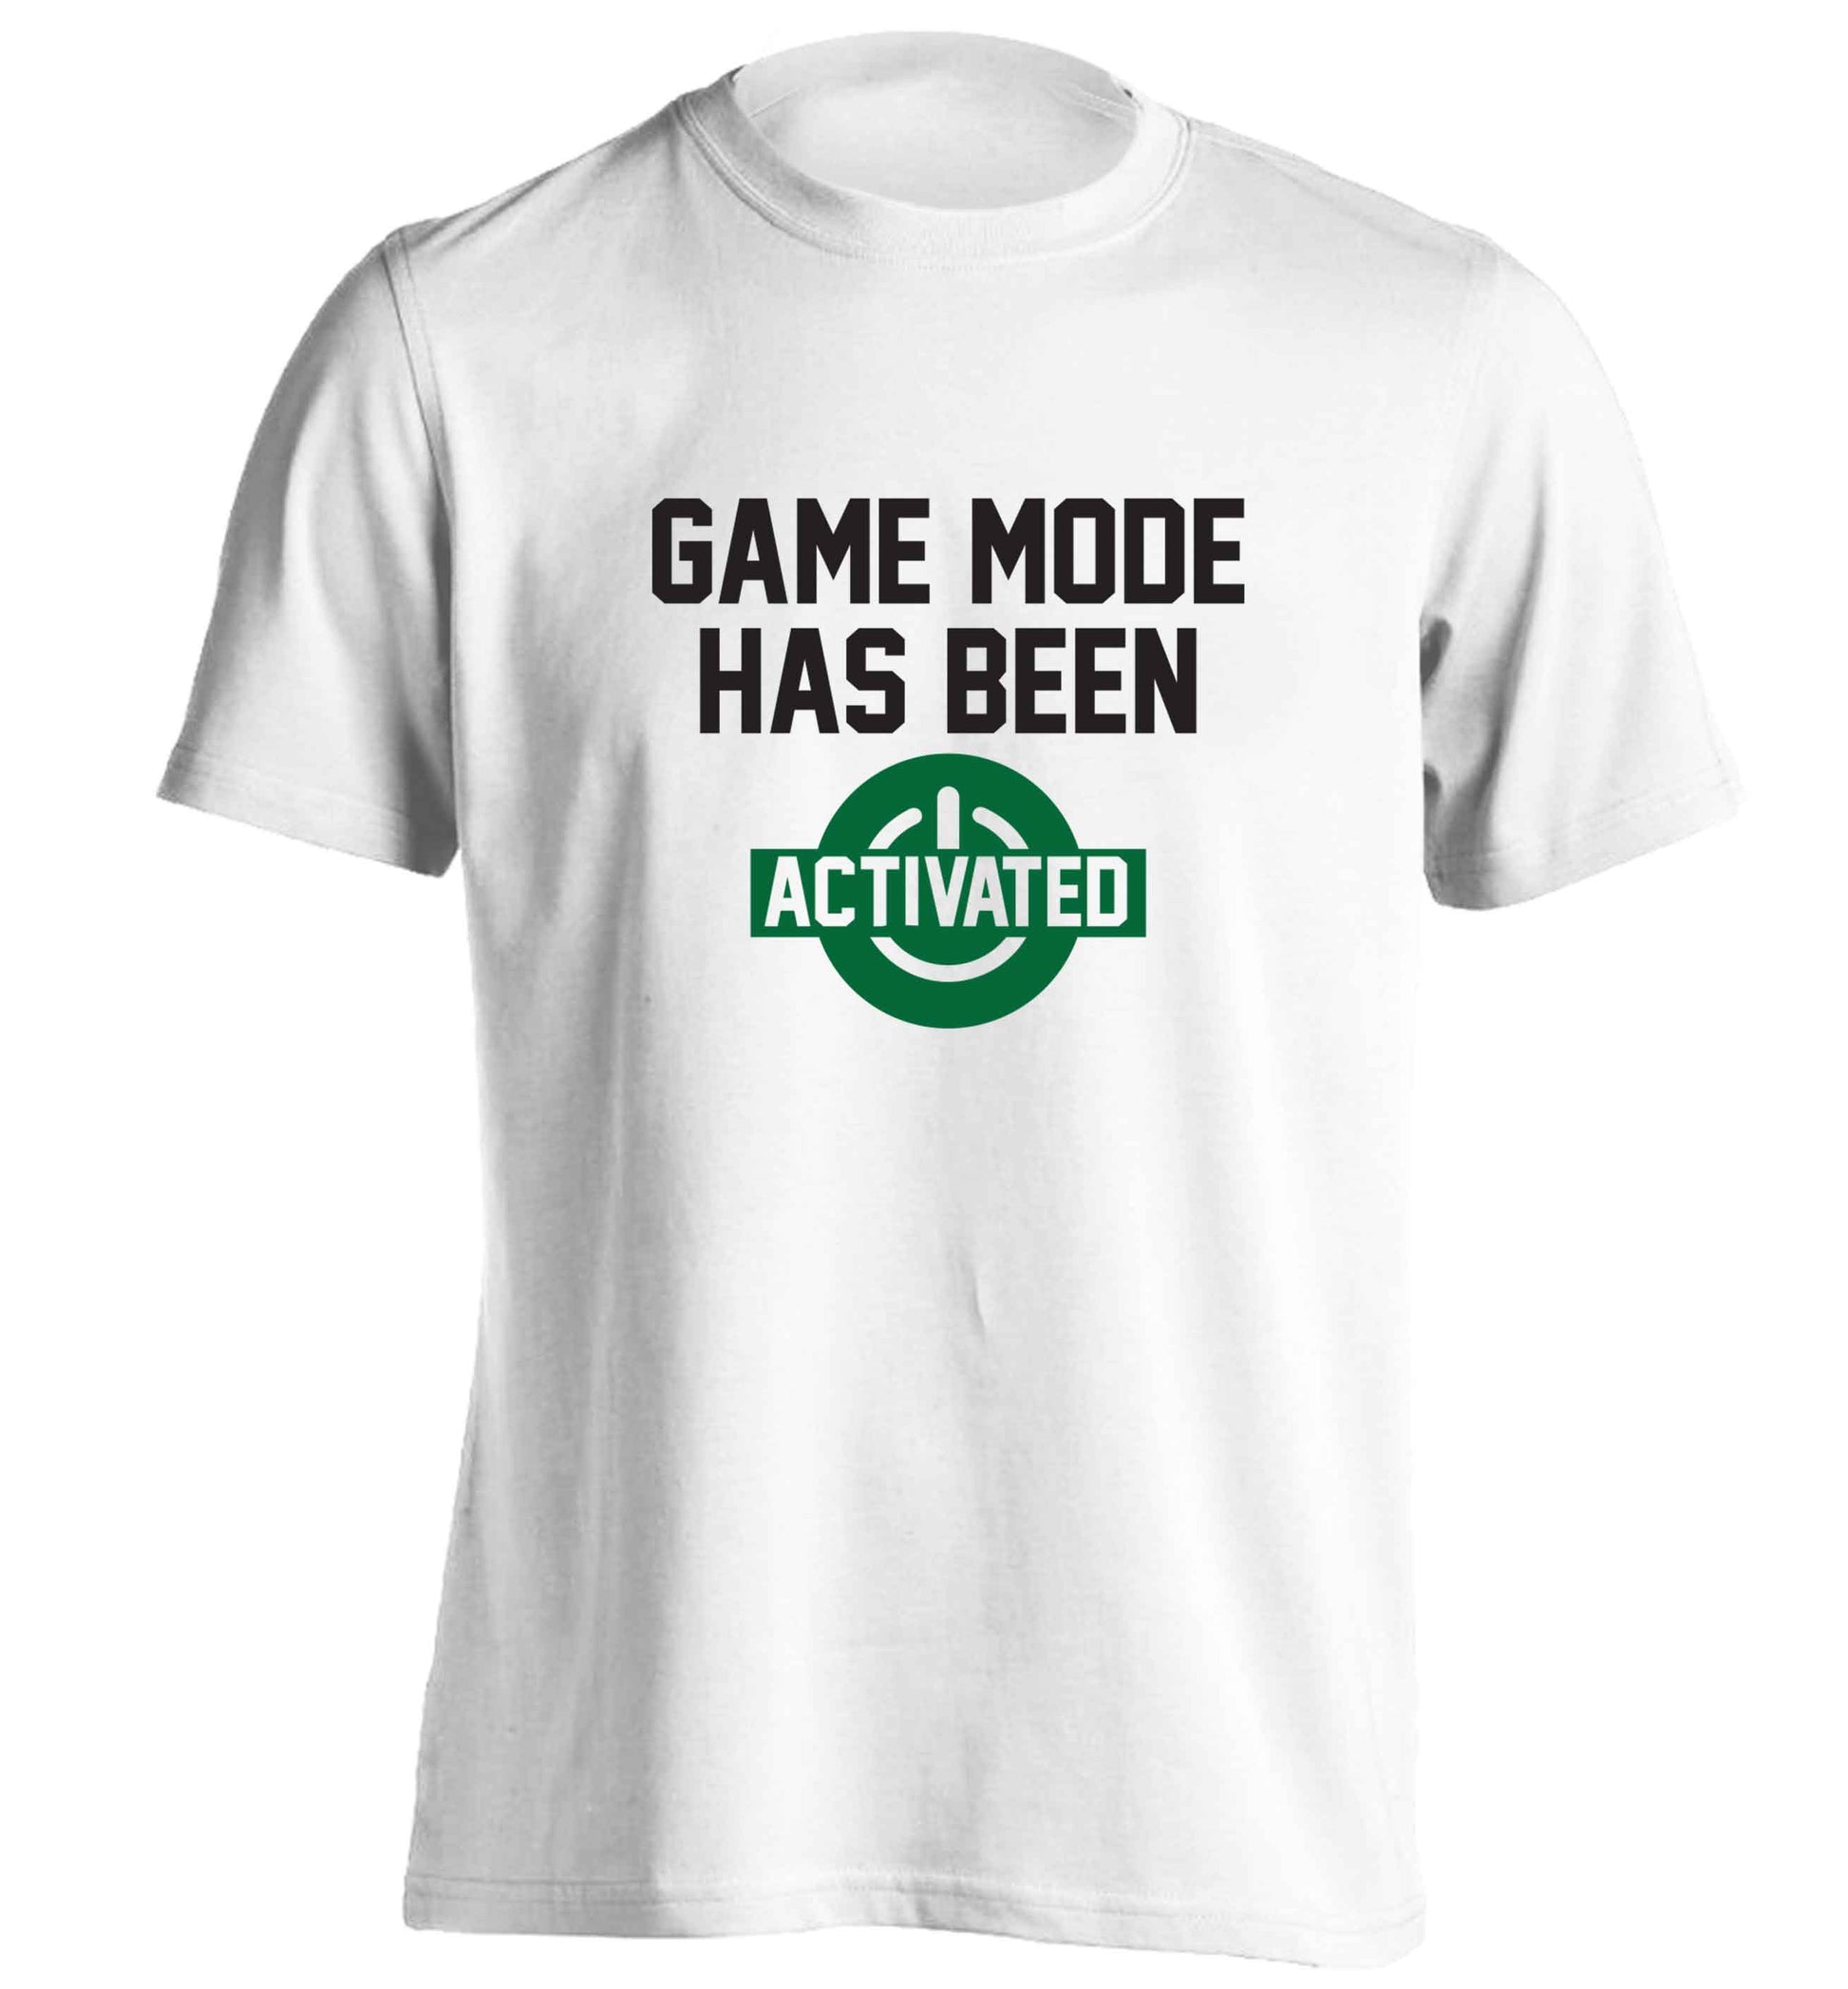 Game mode has been activated adults unisex white Tshirt 2XL